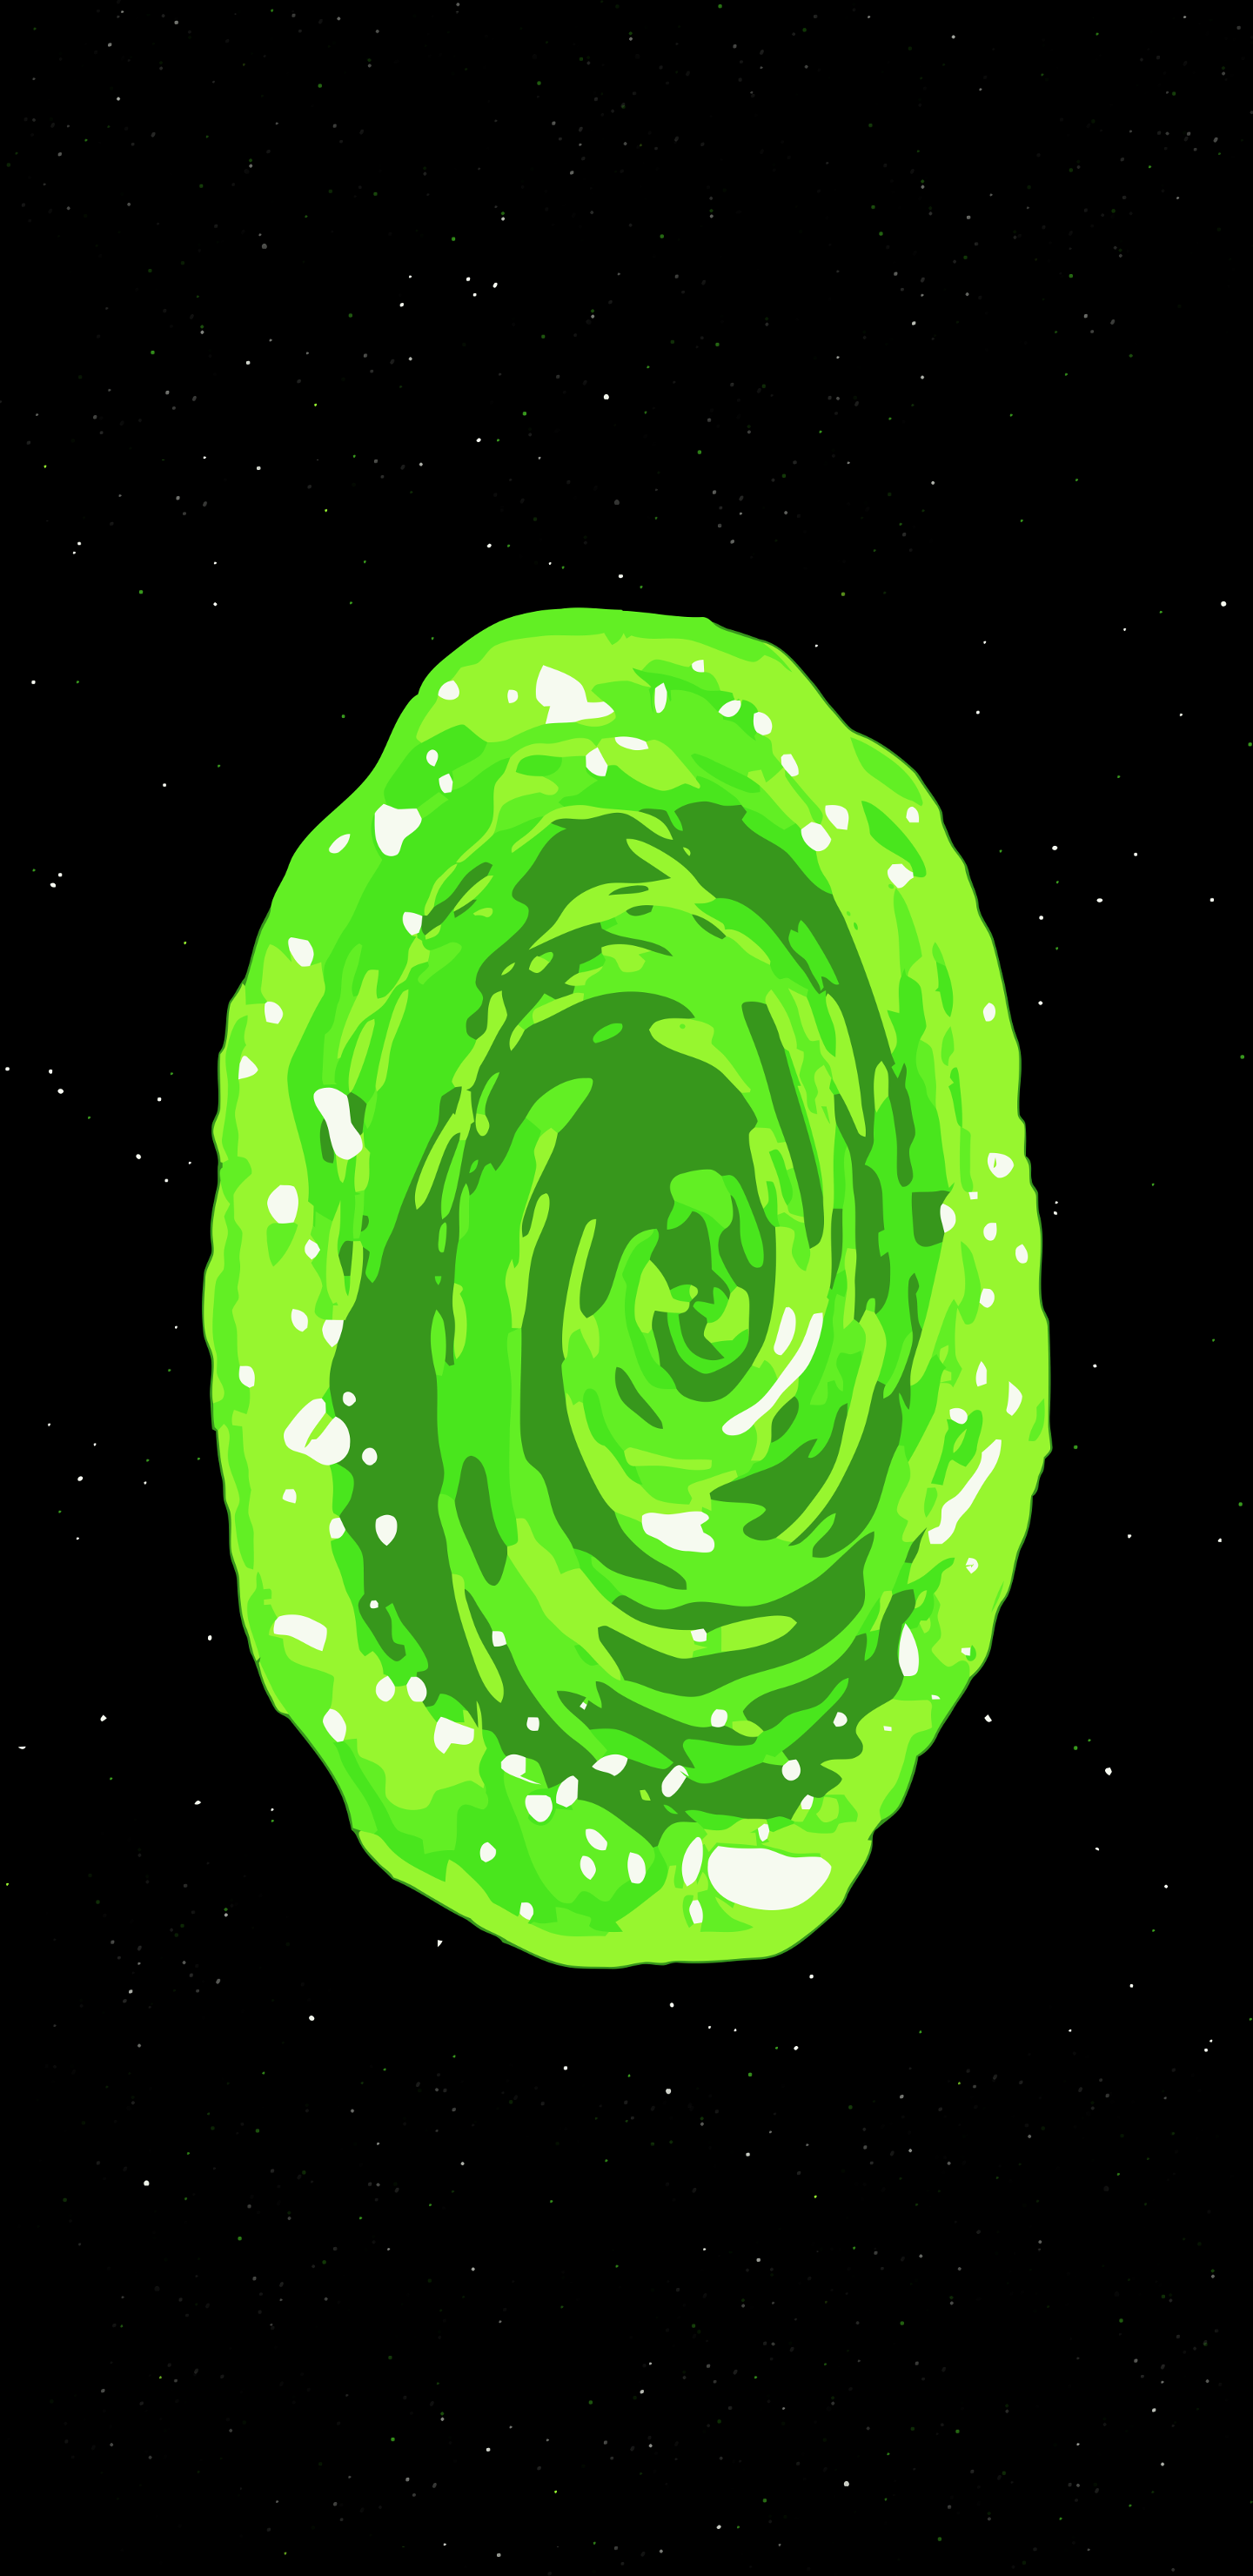 Rick and Morty Portal Wallpaper Free Rick and Morty Portal Background